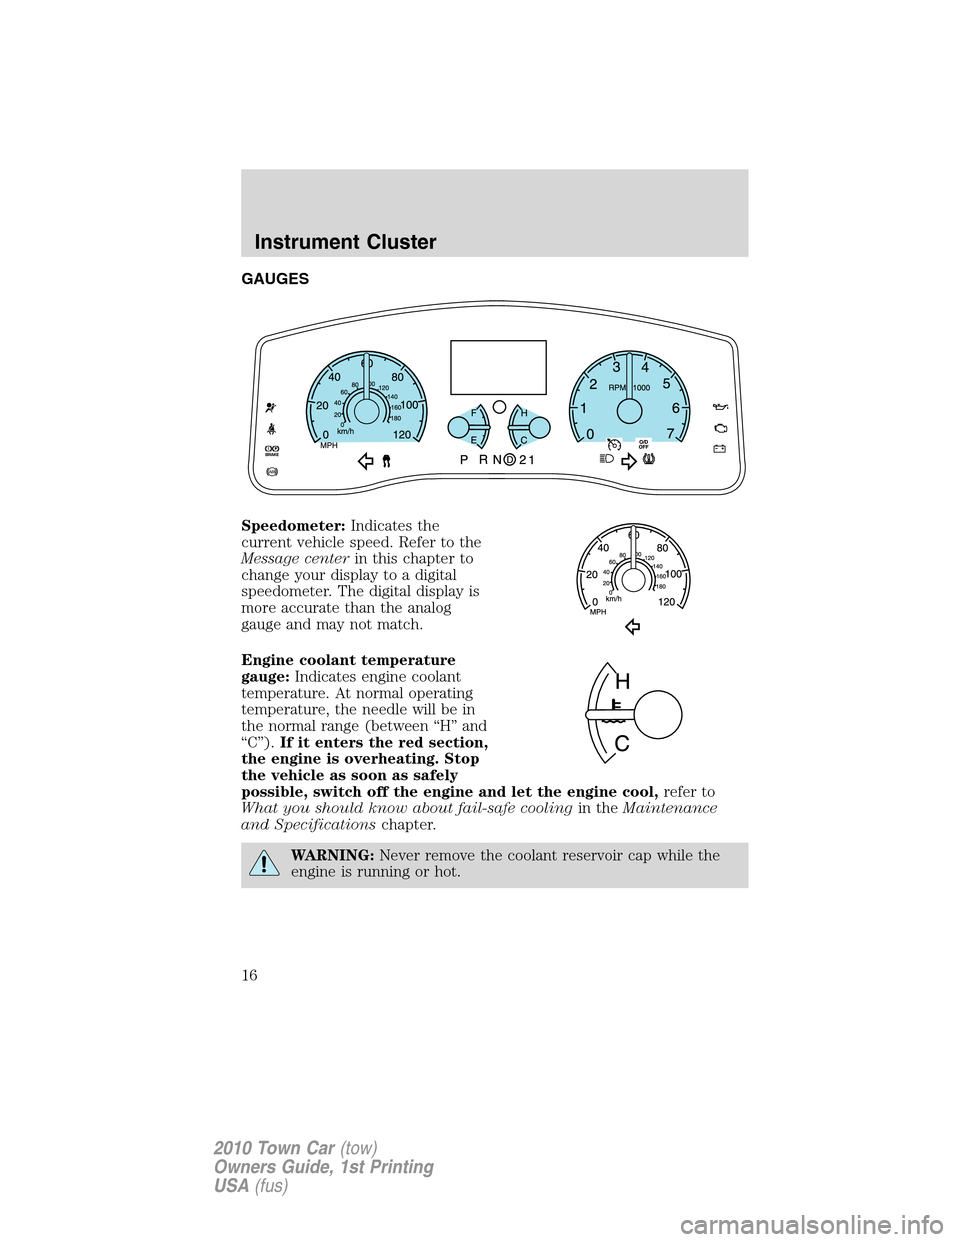 LINCOLN TOWN CAR 2010  Owners Manual GAUGES
Speedometer:Indicates the
current vehicle speed. Refer to the
Message centerin this chapter to
change your display to a digital
speedometer. The digital display is
more accurate than the analog